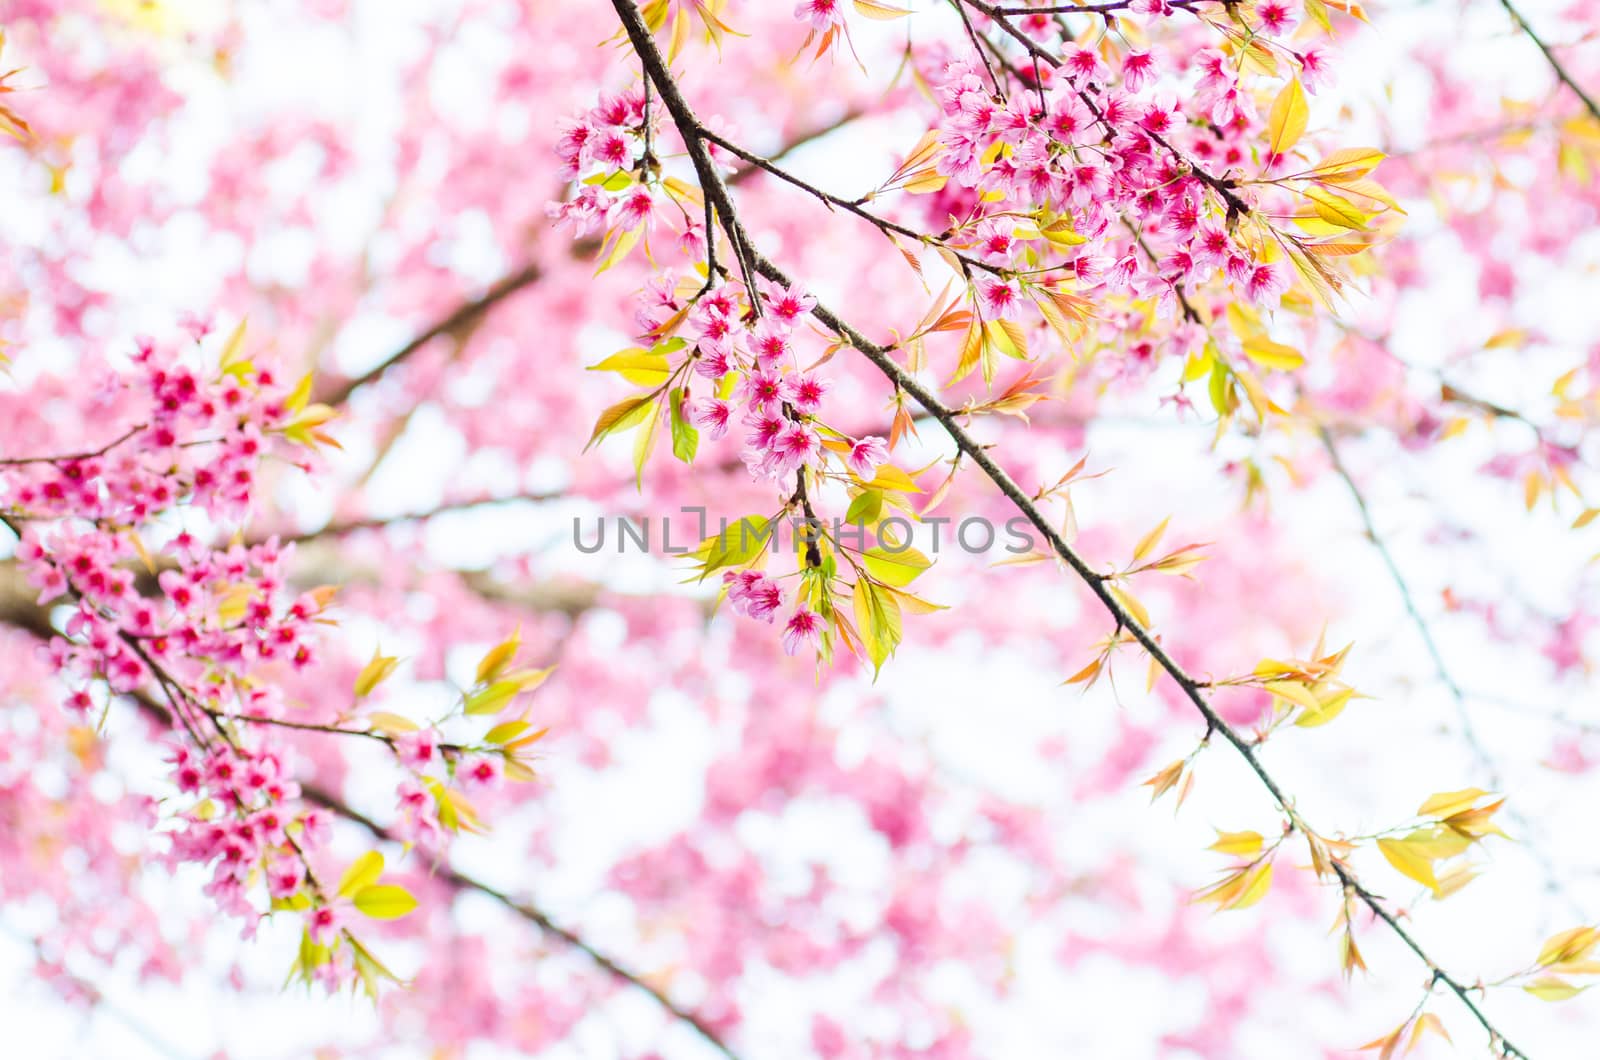 cherry Blossoms tree with sunny day